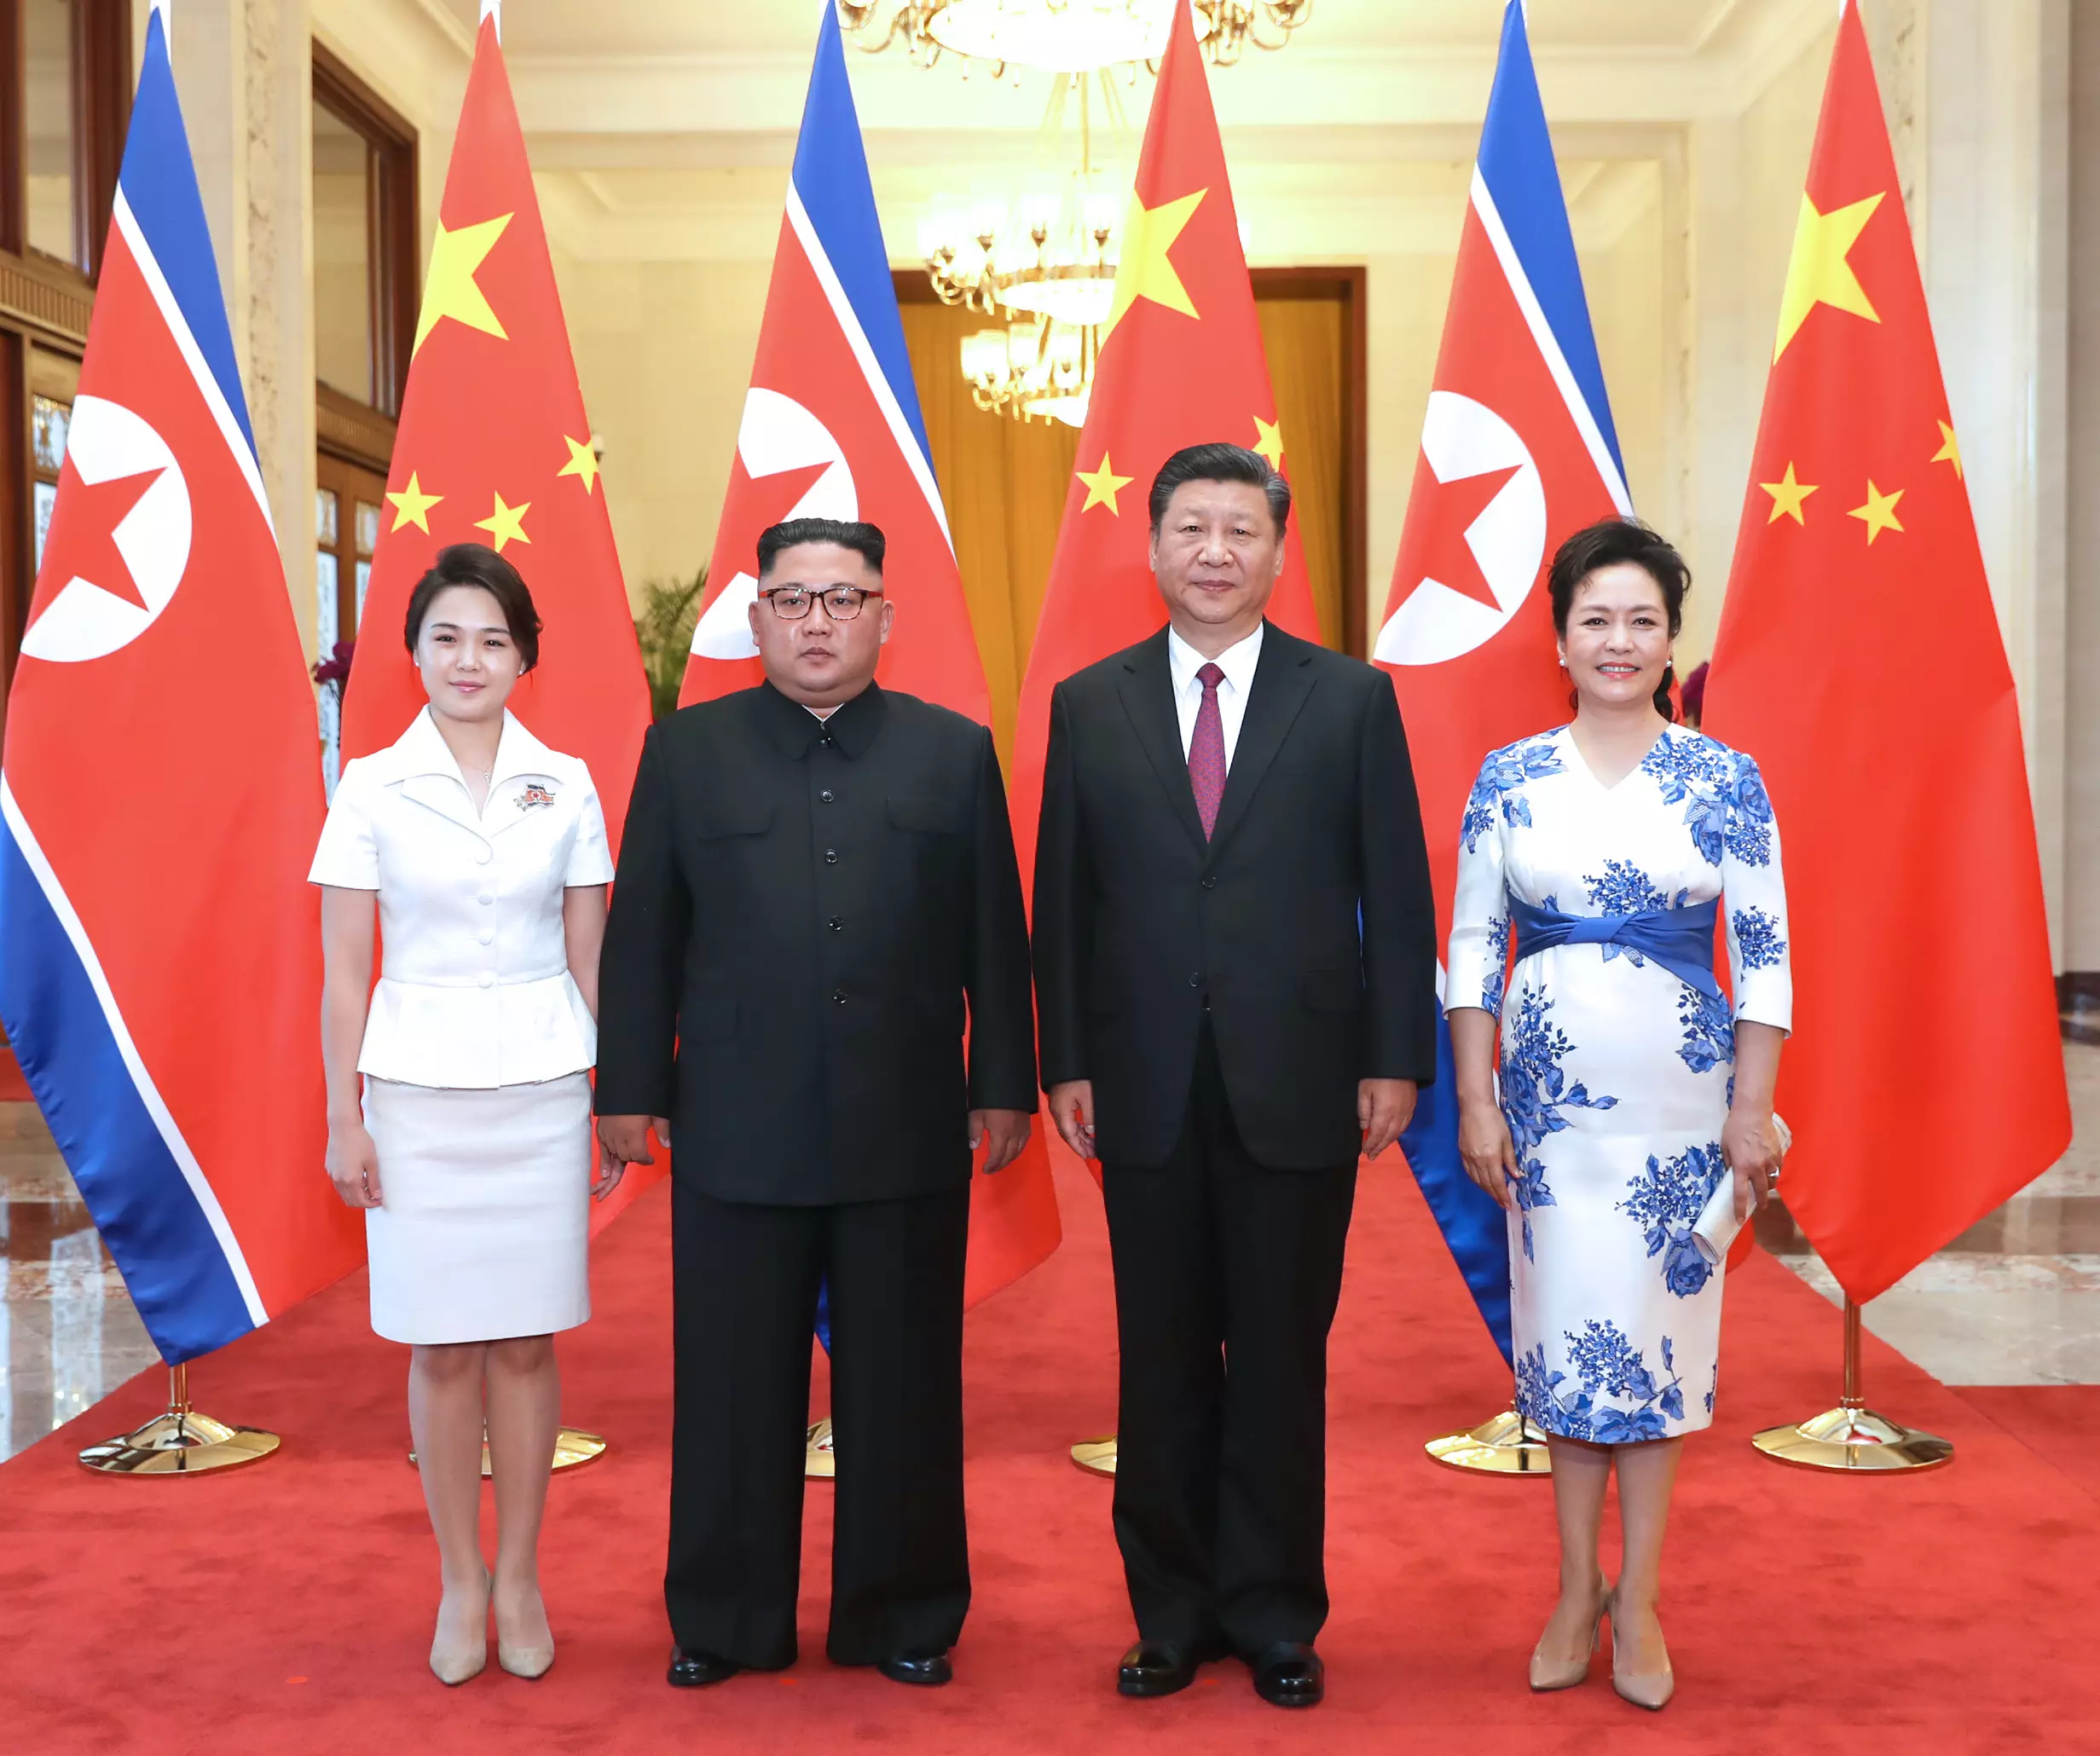 Kim Jong-un (2nd L) and his wife (L) meeting the Chinese President, Xi Jinping and his wife (2nd R), Peng Liyuan (R) (